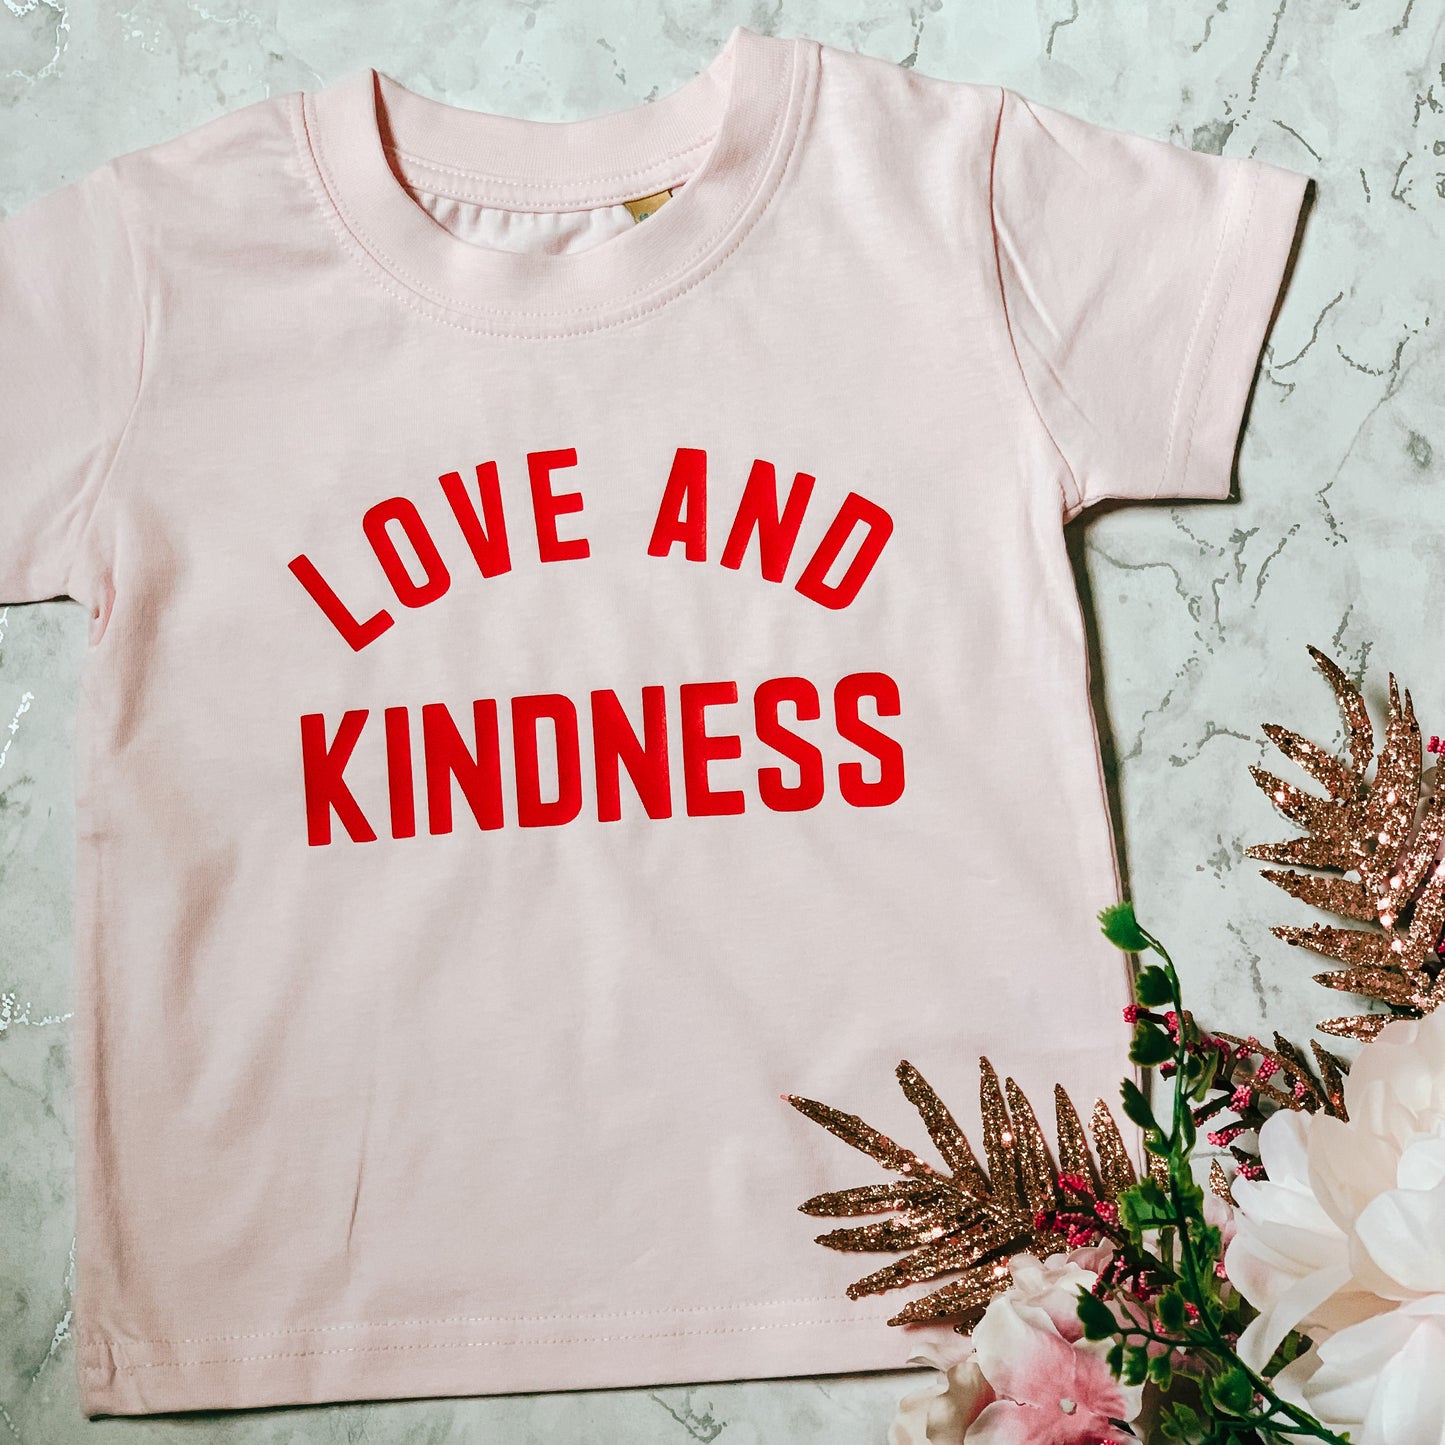 Kids Love And Kindness T-Shirt